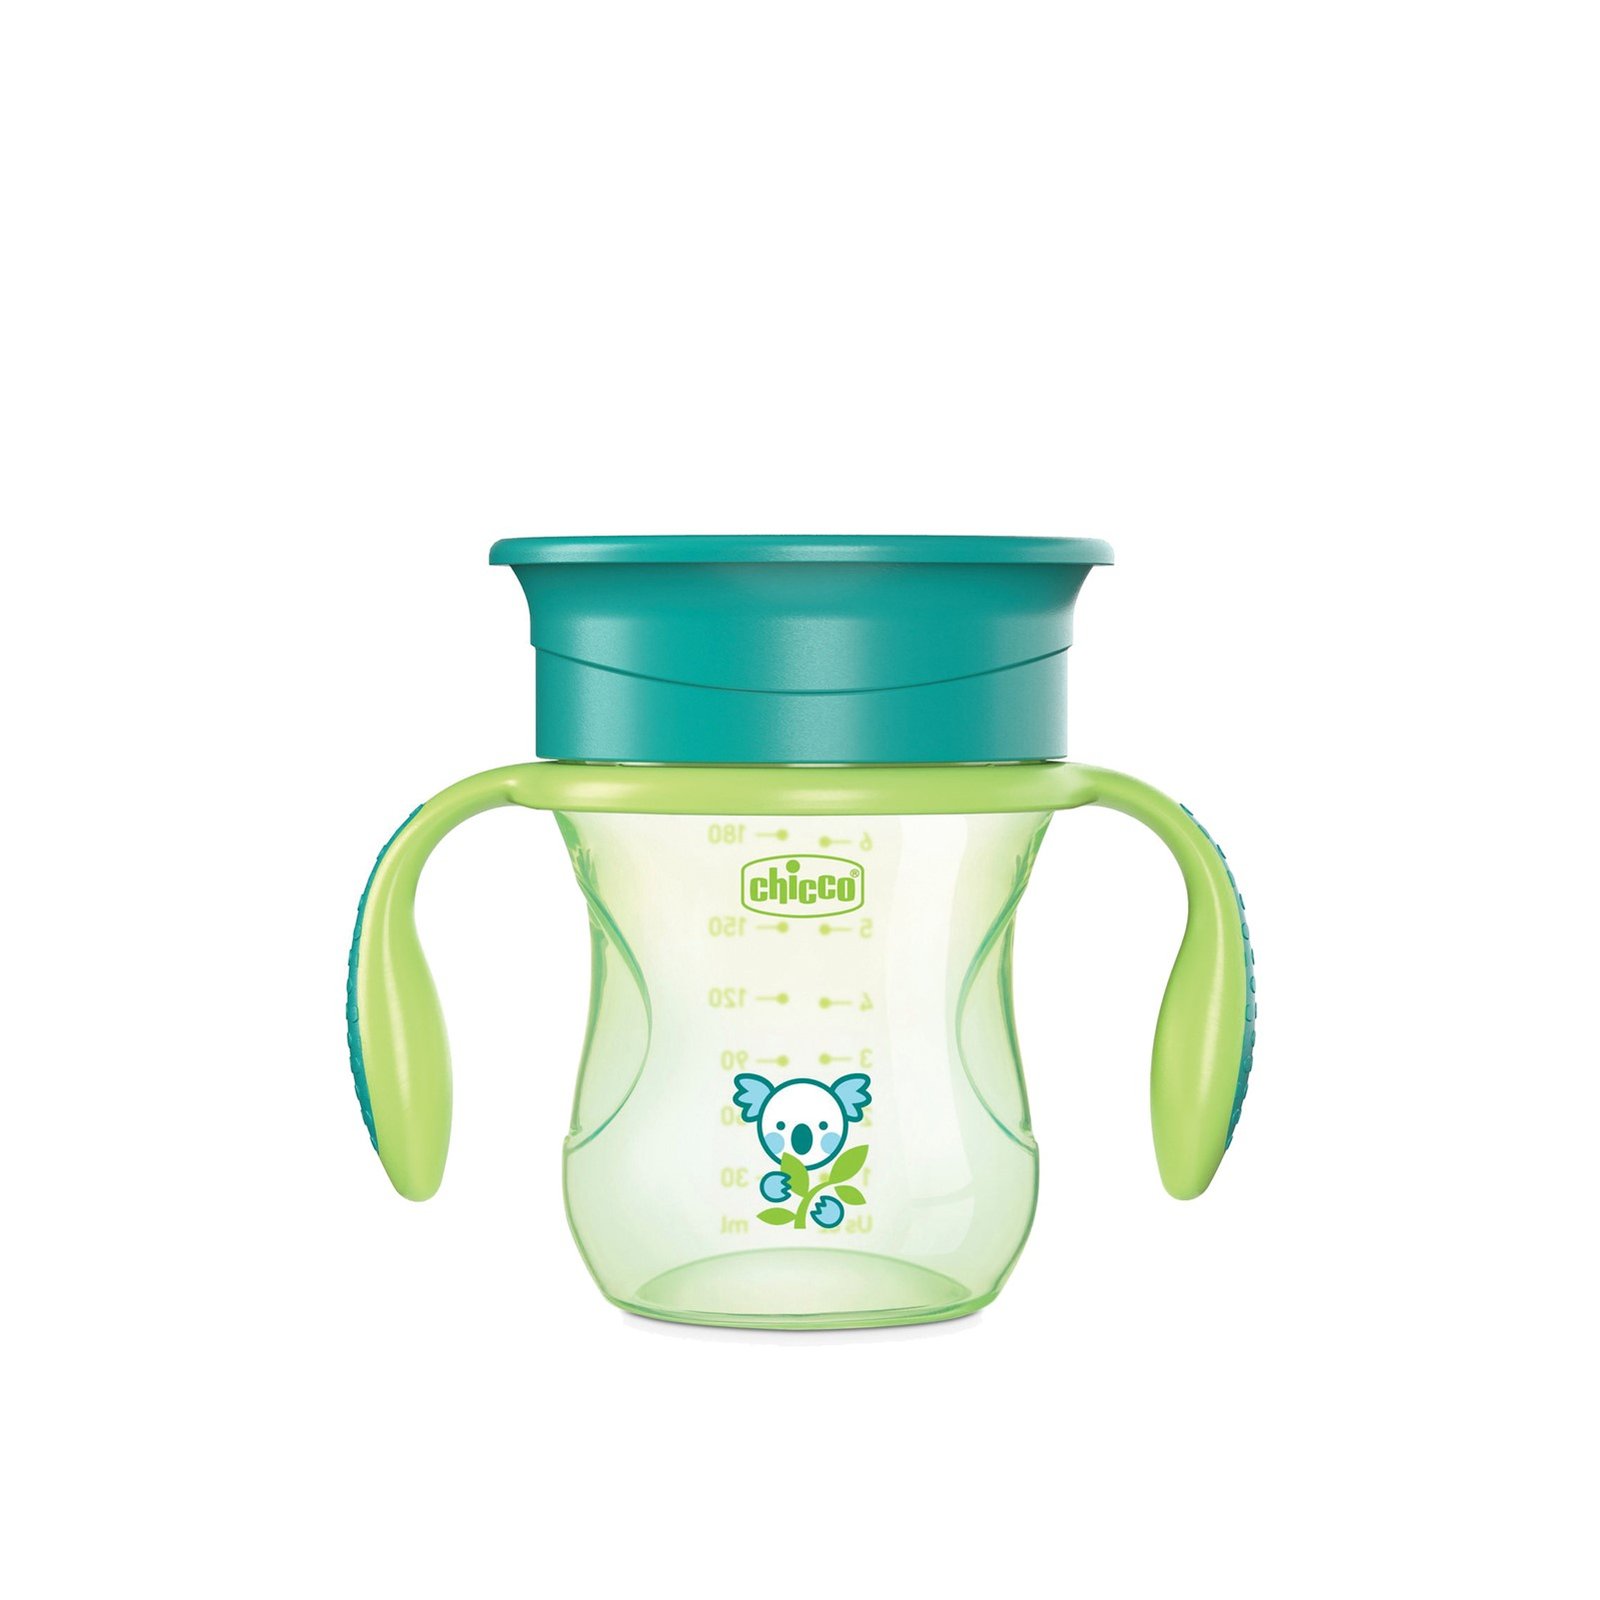 Chicco Mix & Match Perfect Cup Their First Glass 12m+ Green 200ml (7 oz)